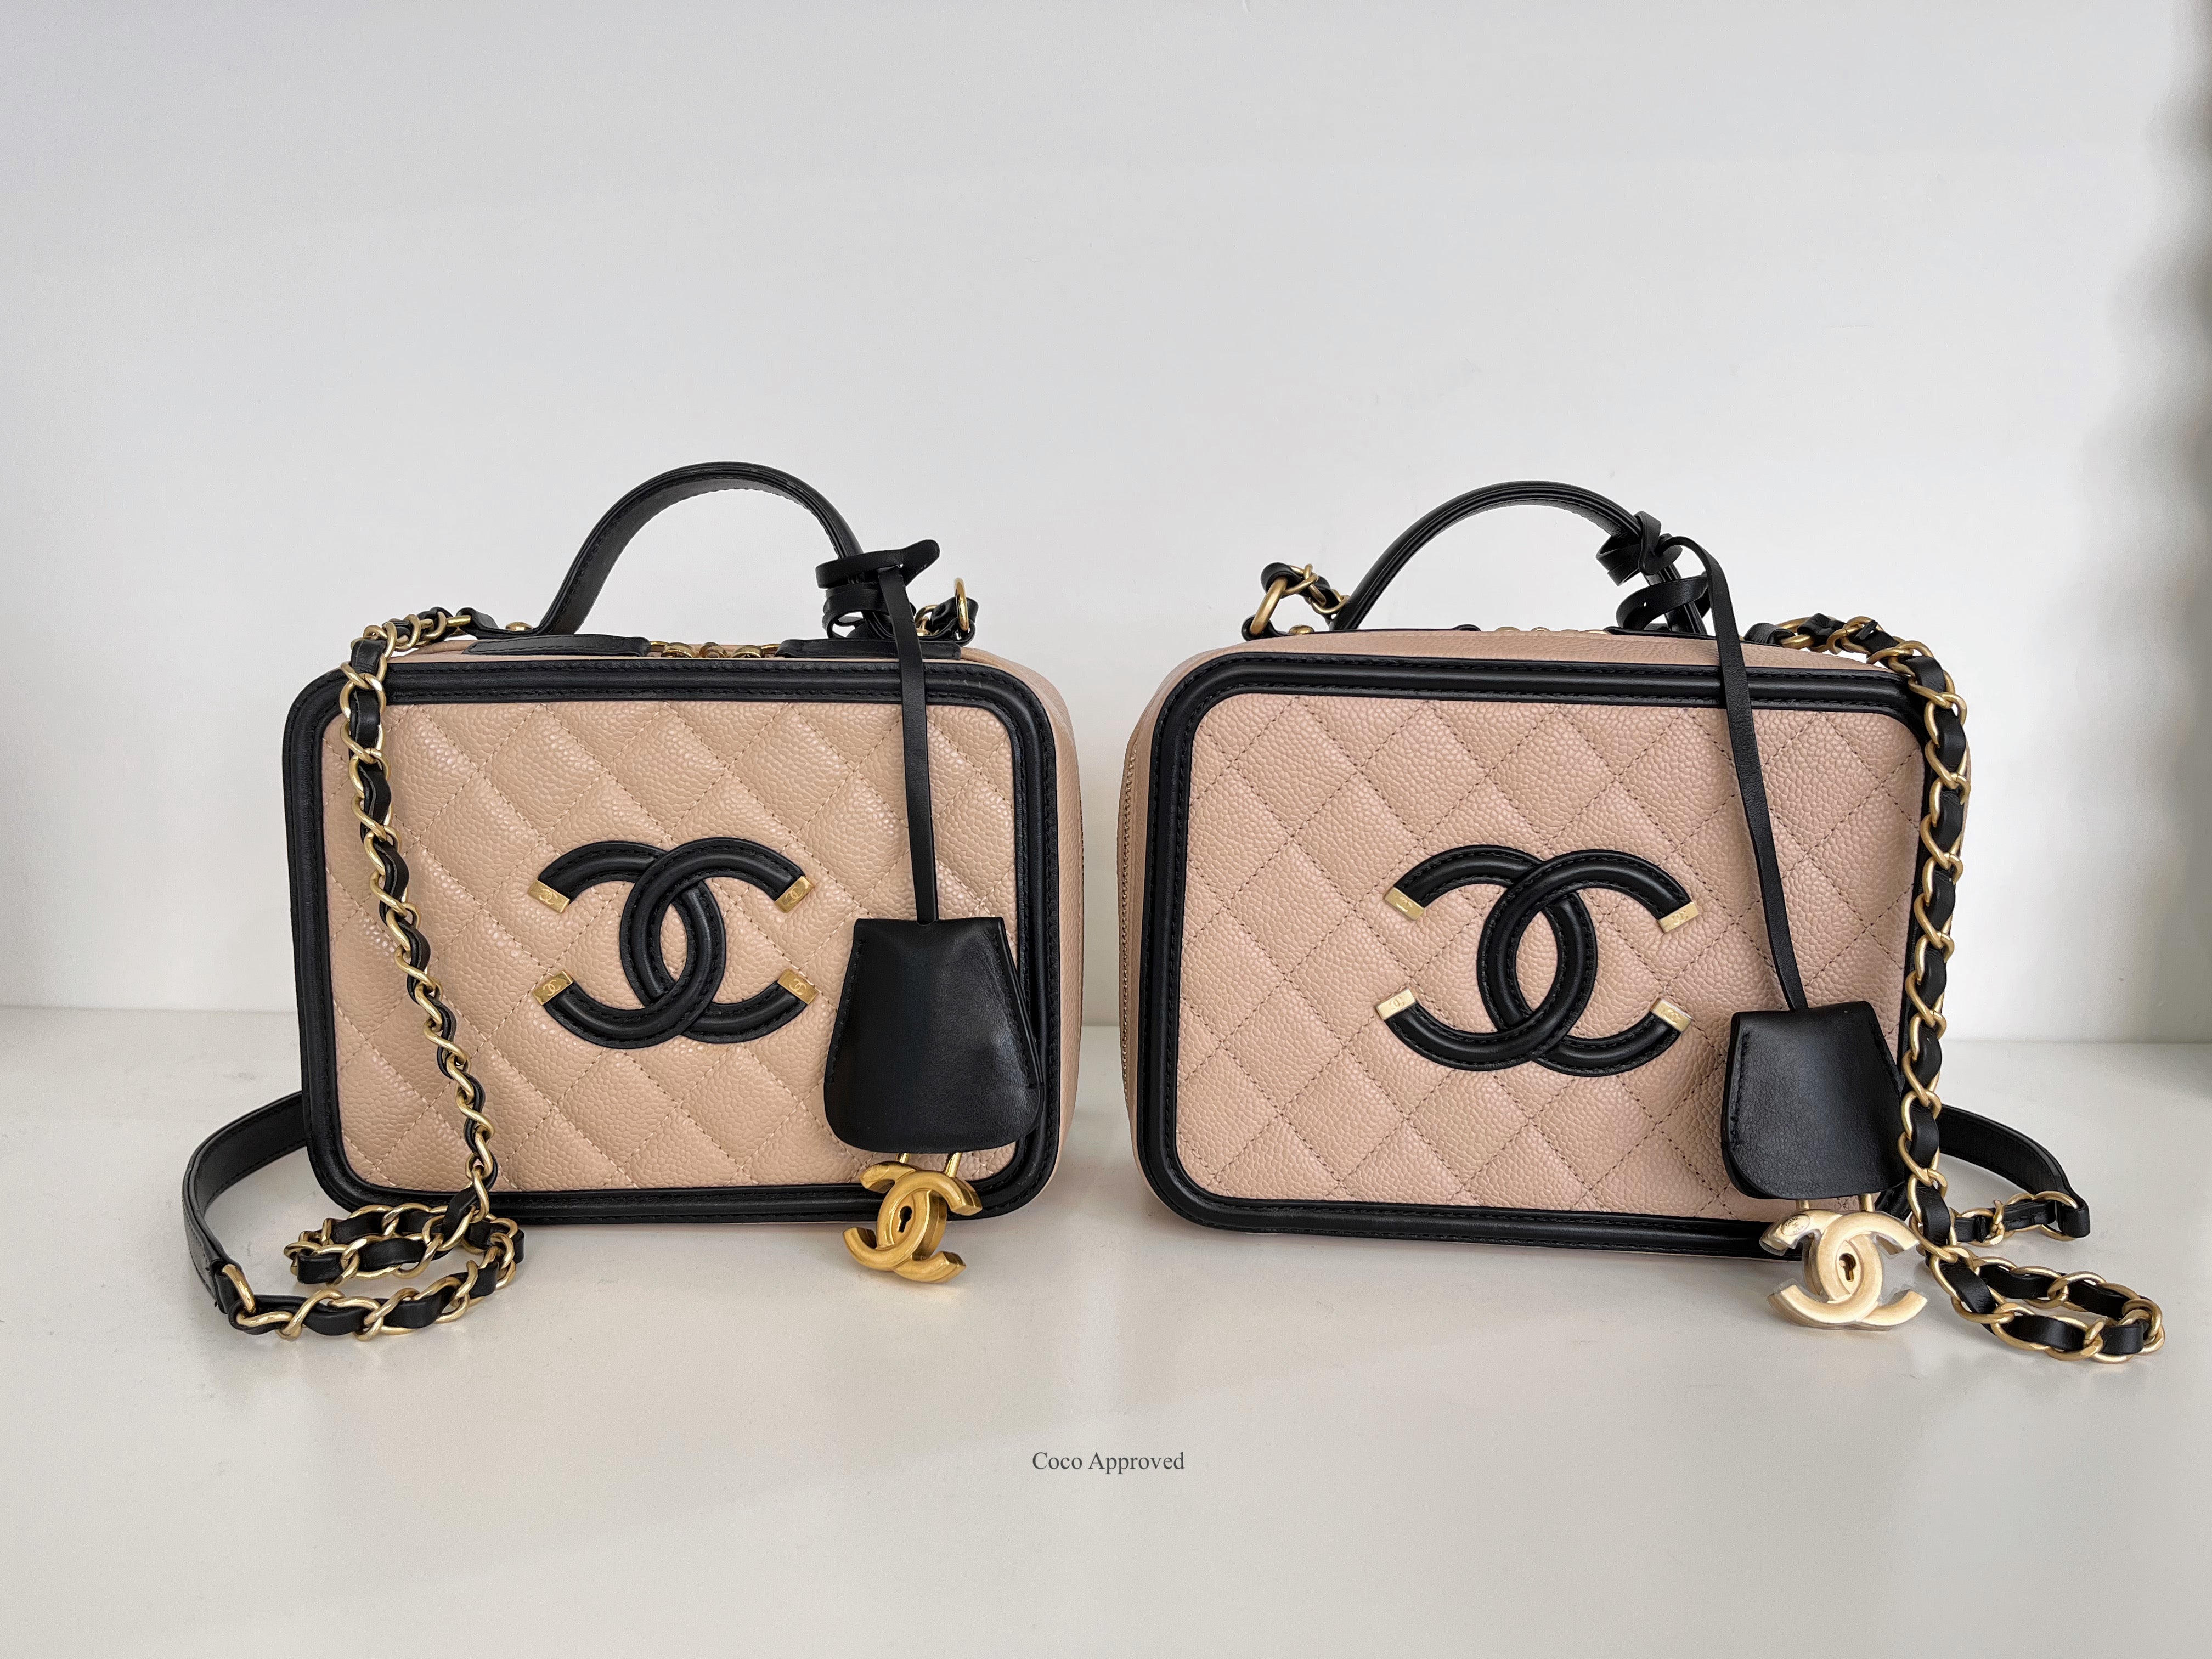 Chanel Quilted Medium CC Filigree Vanity Case Beige Caviar Gold Hardware : spot the counterfeit!